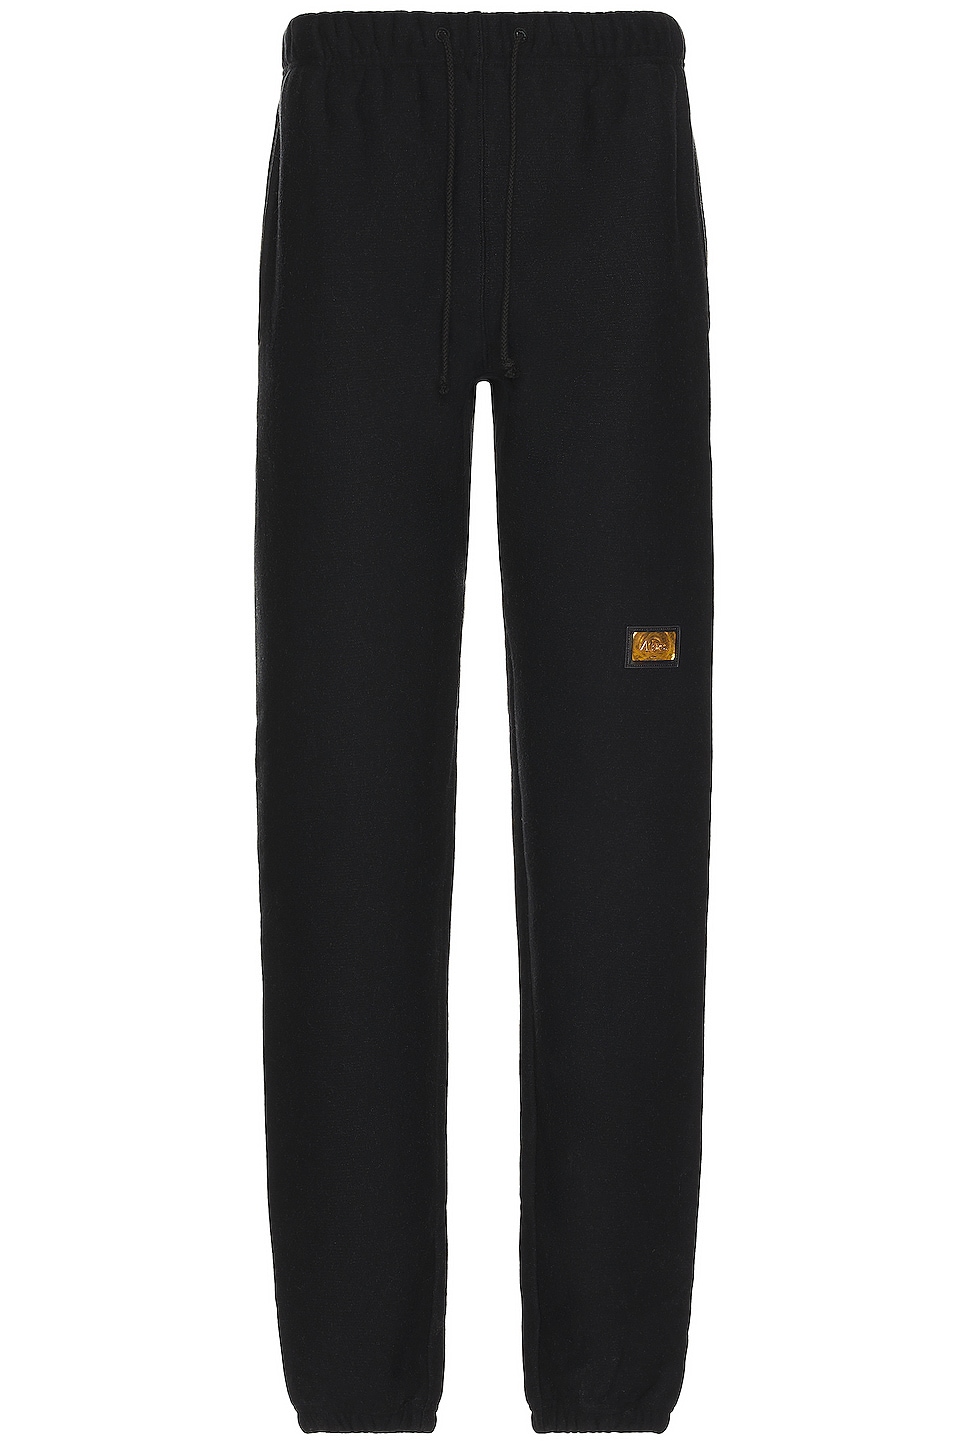 Image 1 of Advisory Board Crystals Sweatpants in Black